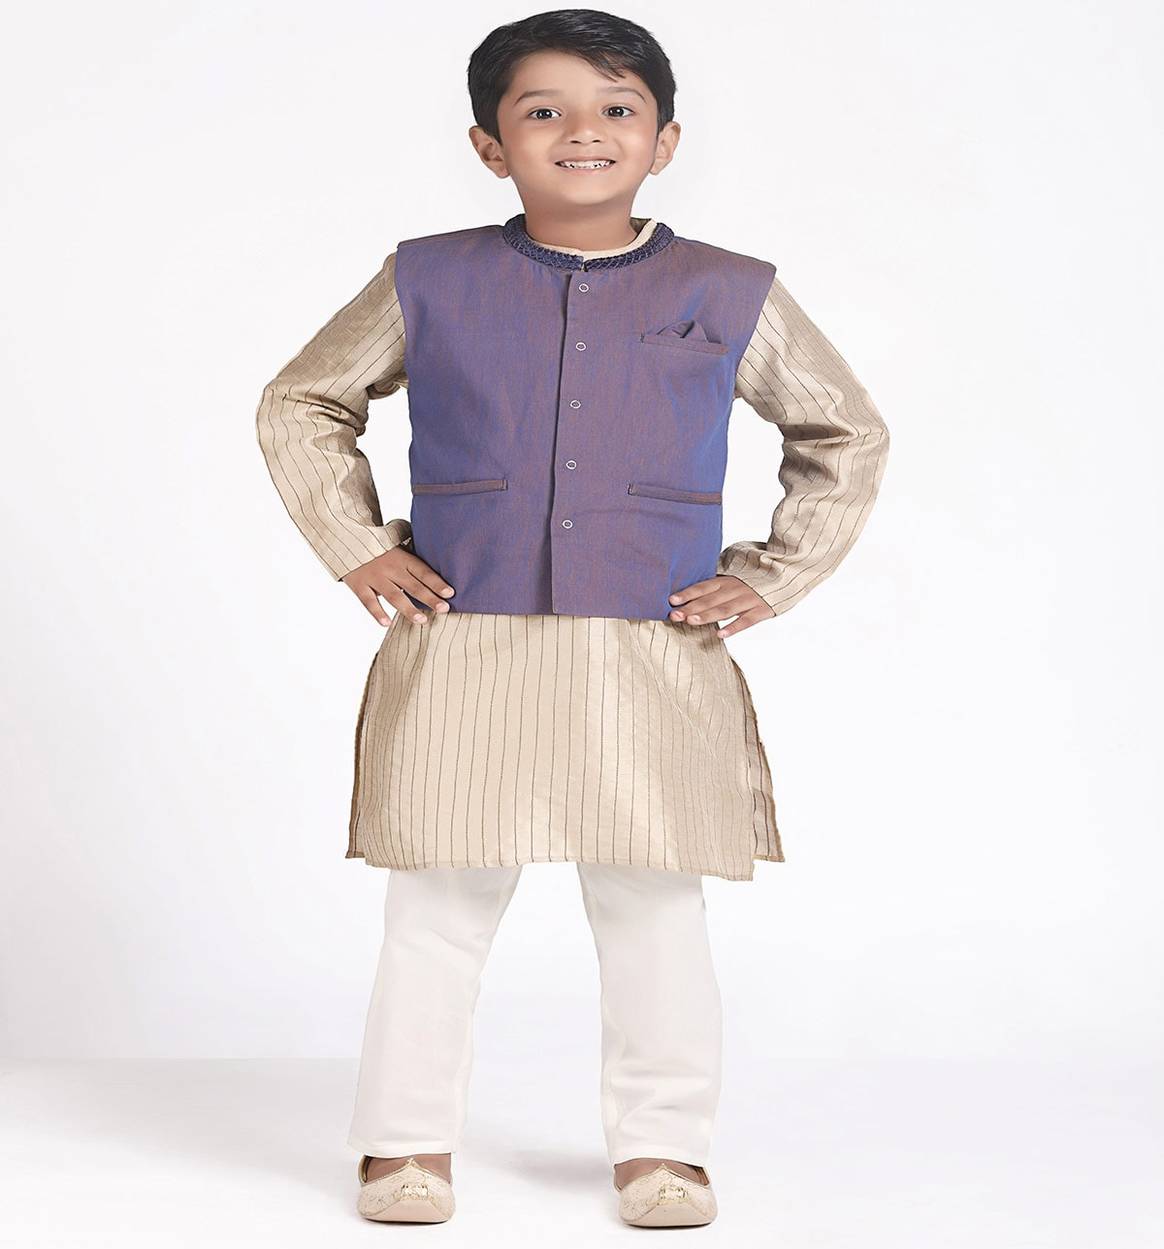 Toonz Retail launches new festive collection for kids'